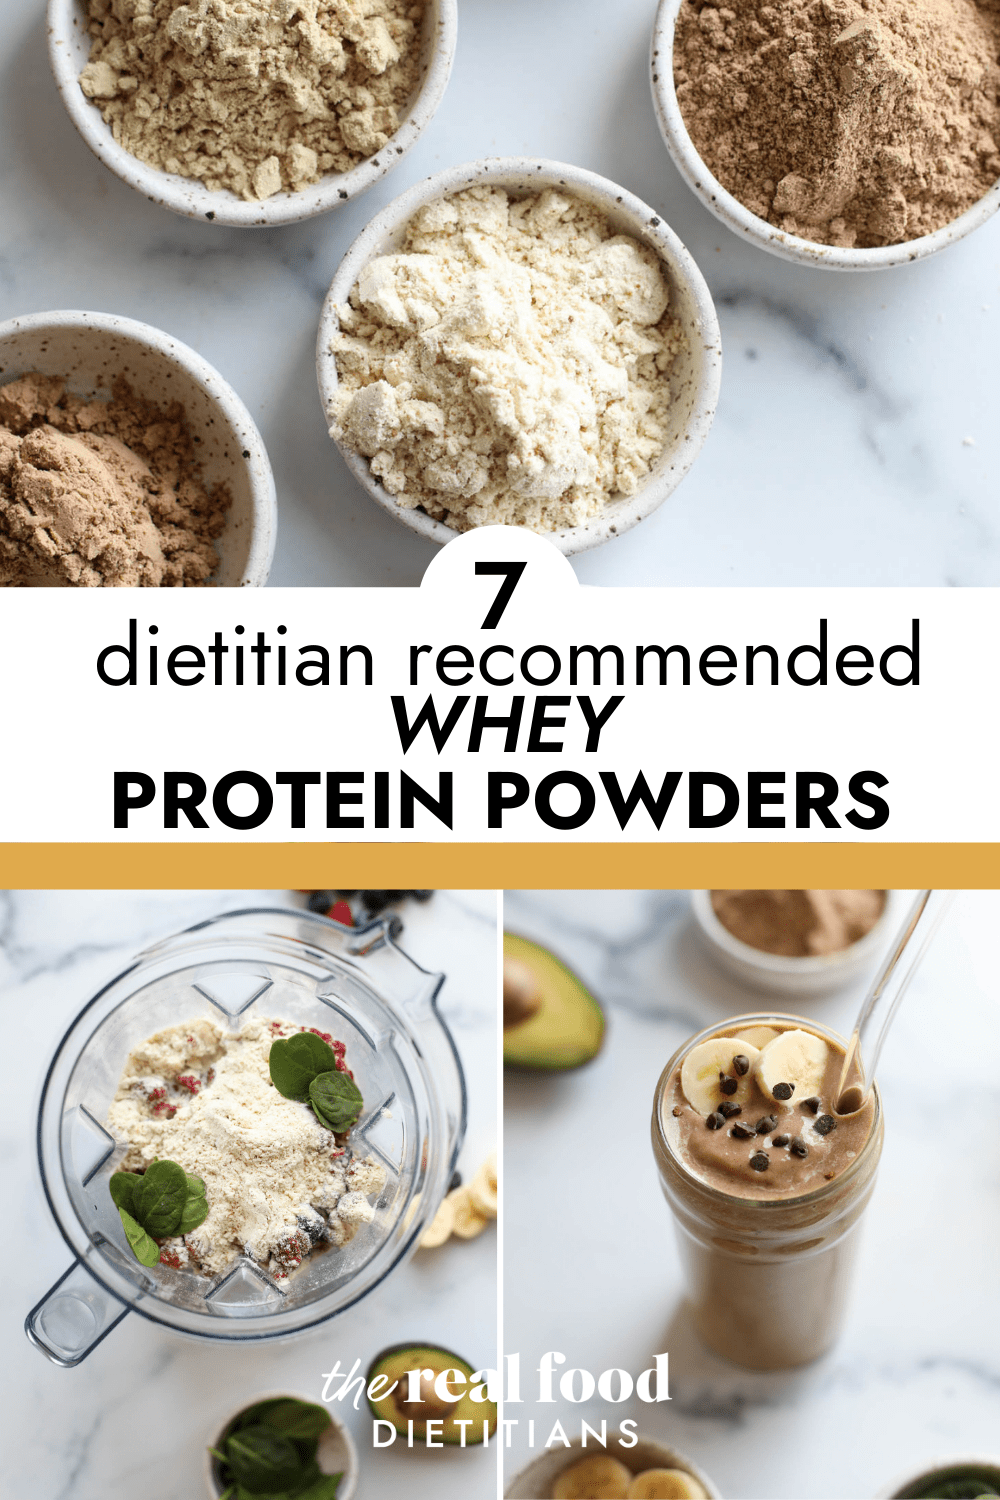 https://therealfooddietitians.com/wp-content/uploads/2022/03/7-Dietitian-Recommended-Whey-Protein-Powders-1000-x-1500-px.png